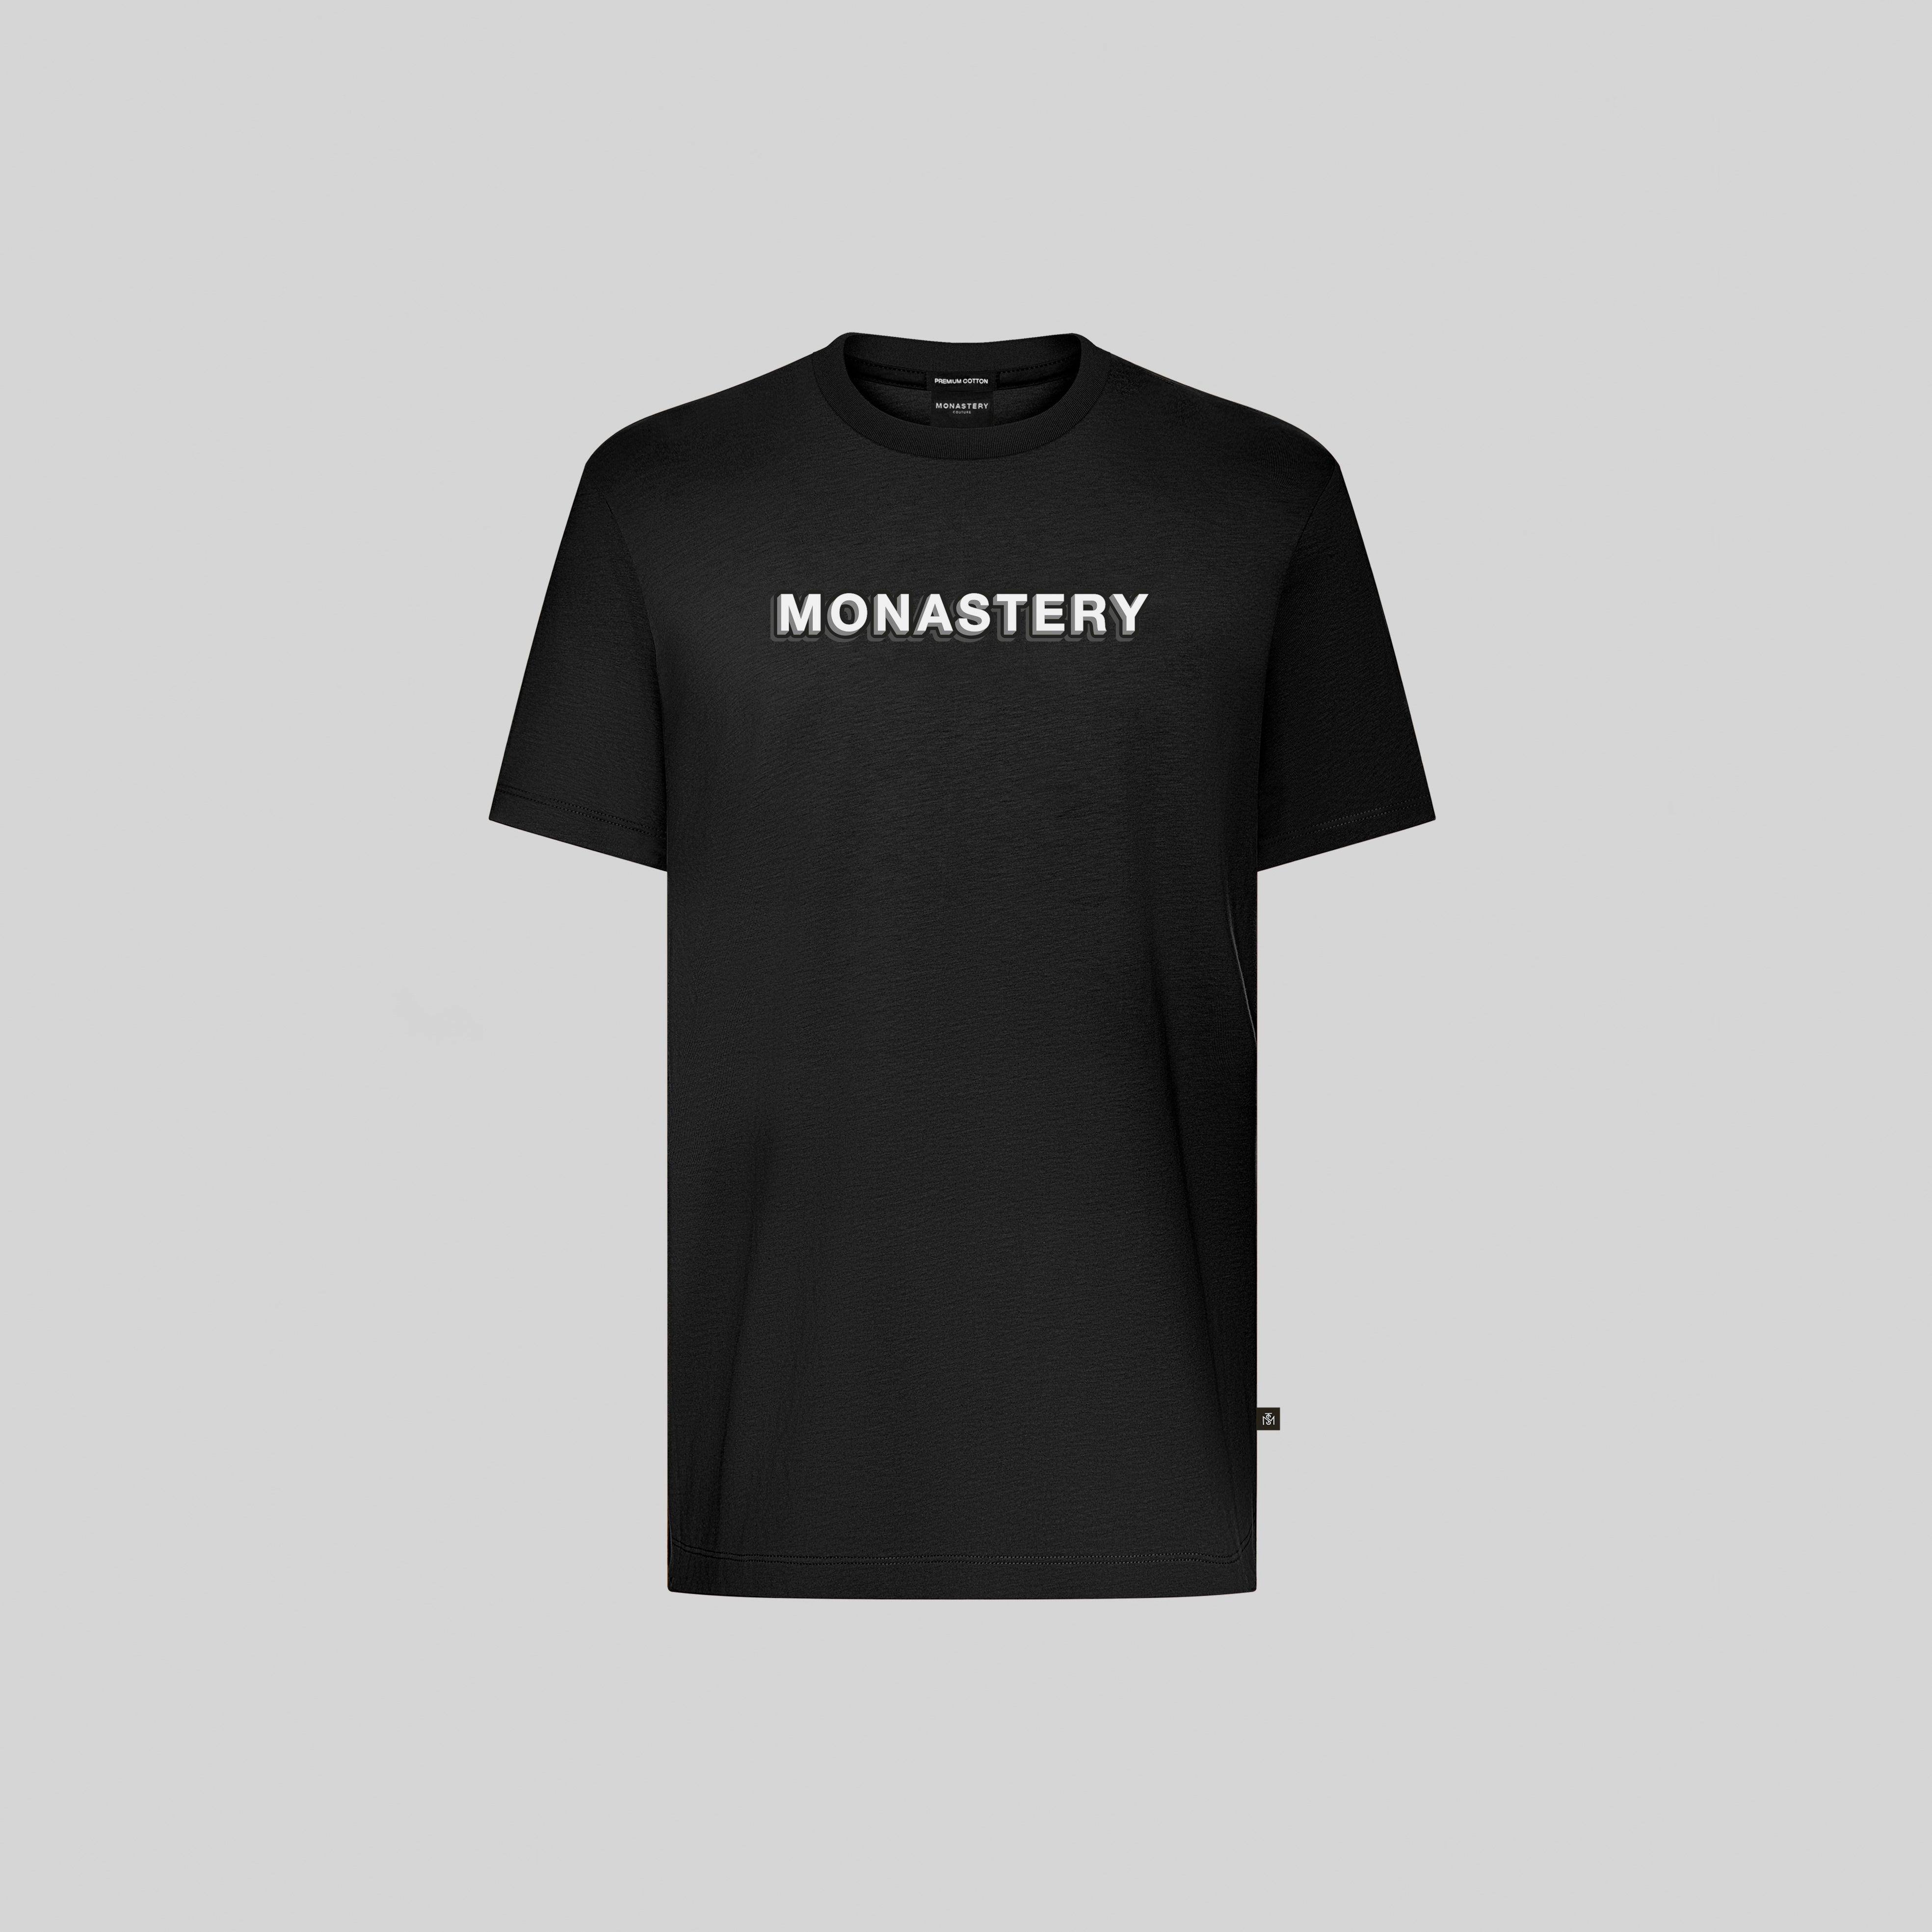 ZAGROS BLACK T-SHIRT | Monastery Couture